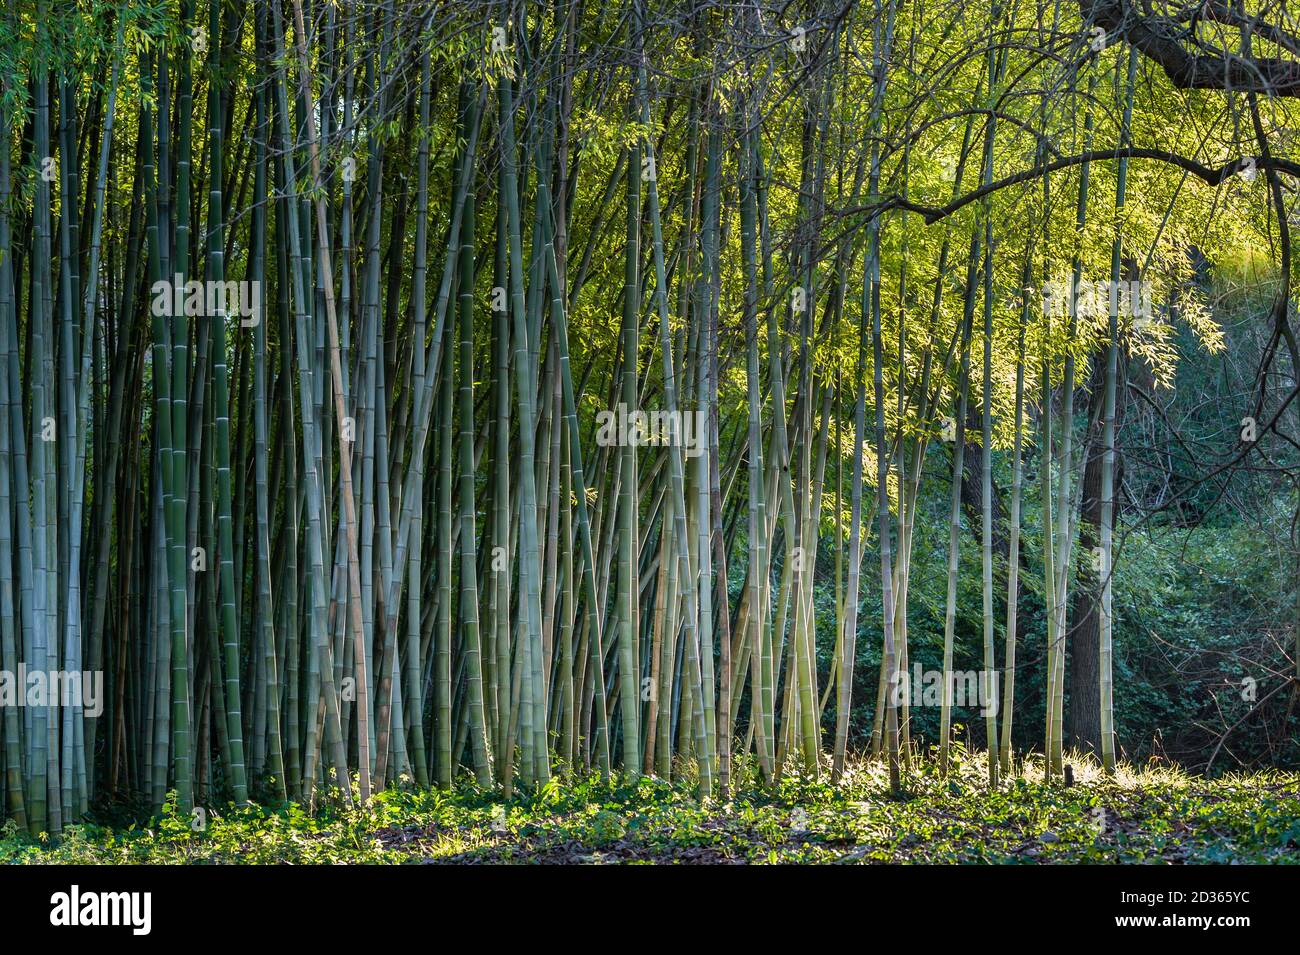 Bamboo forest edge with lateral sun light Stock Photo